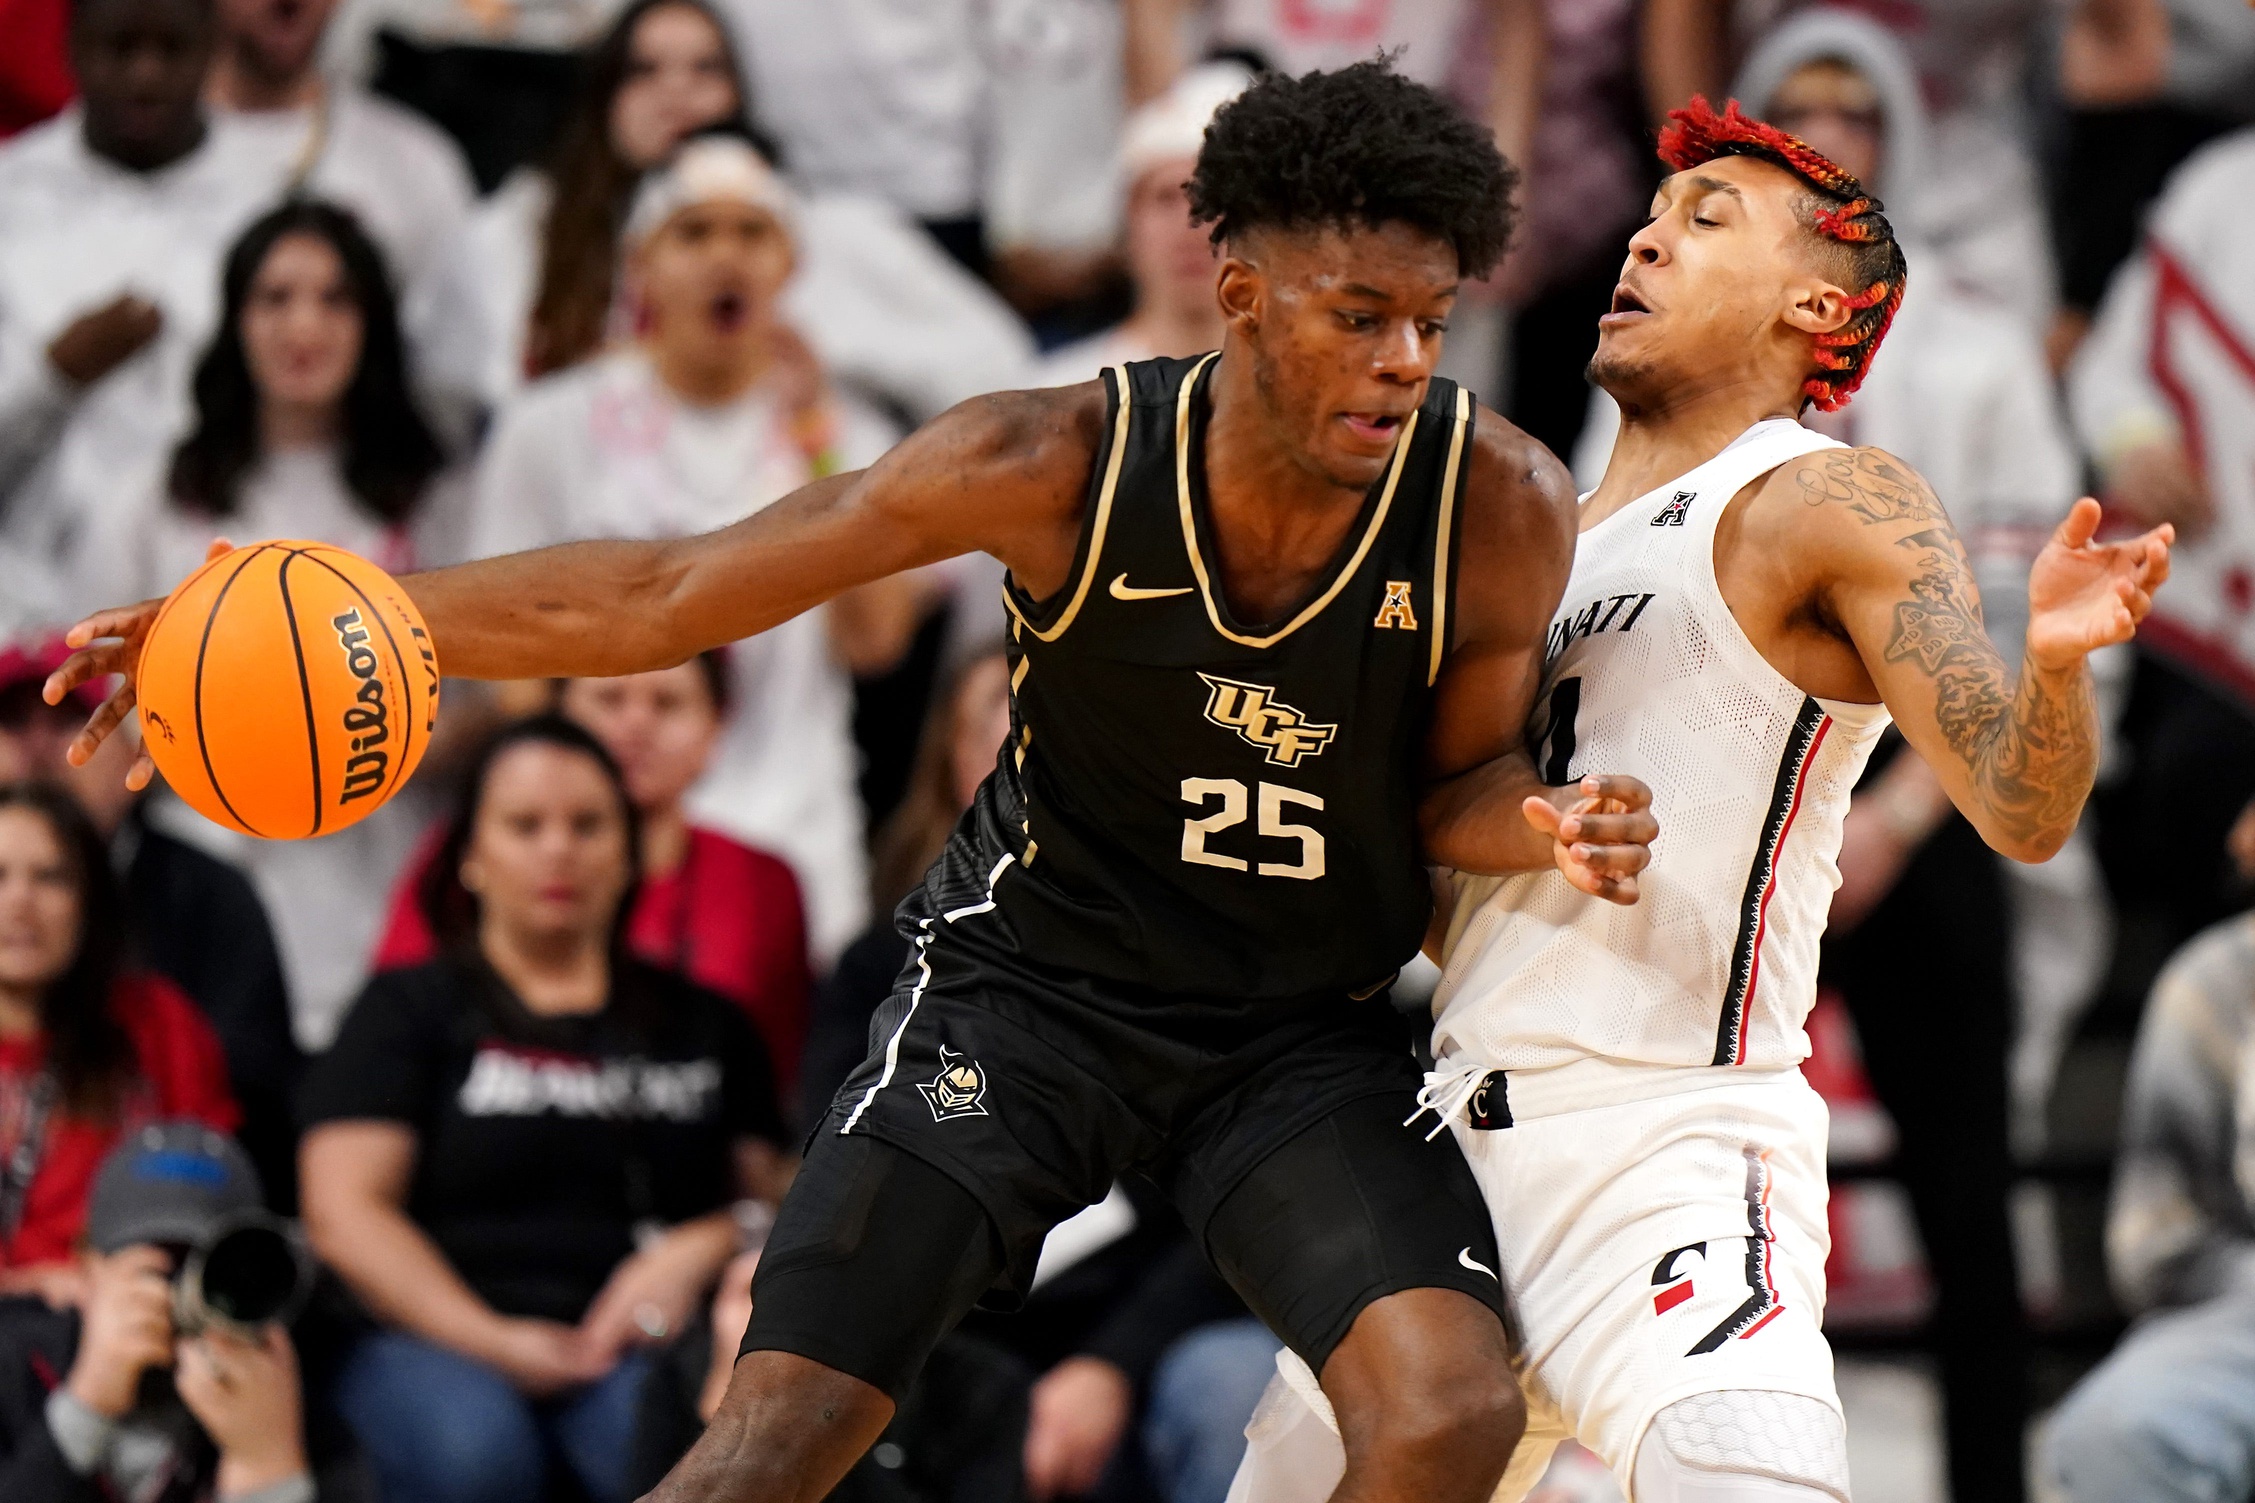 Cincinnati Bearcats guard Jeremiah Davenport (24) draws a charge foul against UCF Knights forward Taylor Hendricks (25) in the first half of a college basketball game between the UCF Knights and the Cincinnati Bearcats, Saturday, Feb. 4, 2023, at Fifth Third Arena in Cincinnati. Ucf Knights At Cincinnati Bearcats Feb 4 0123